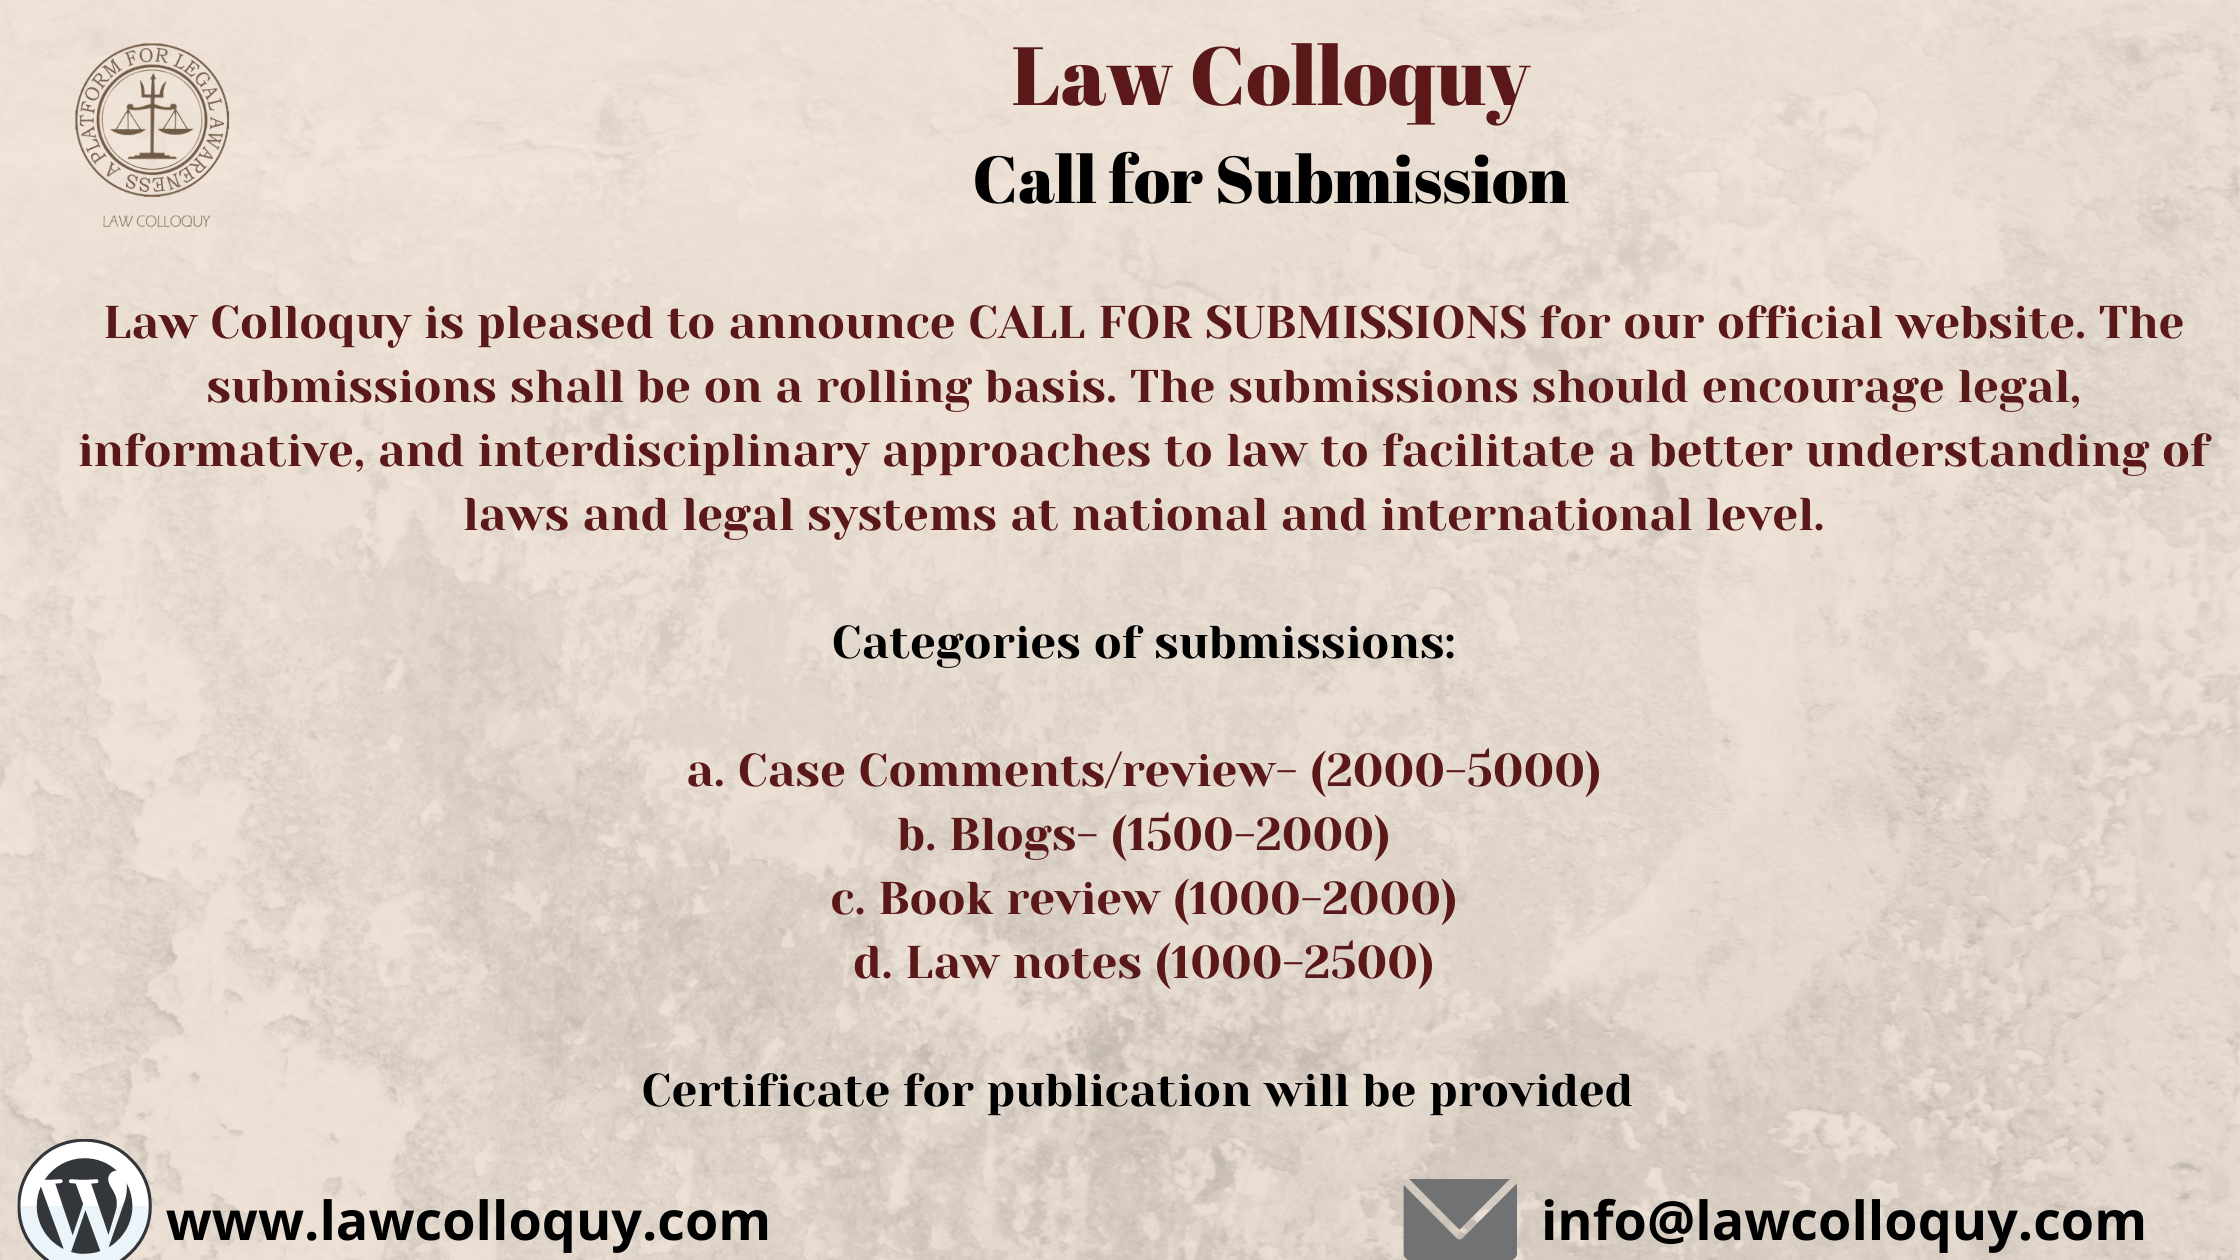 Law Colloquy is pleased to announce CALL FOR SUBMISSIONS for our official website. The submissions shall be on a rolling basis. The submissions should encourage legal, informative, and interdisciplinary approaches to.png